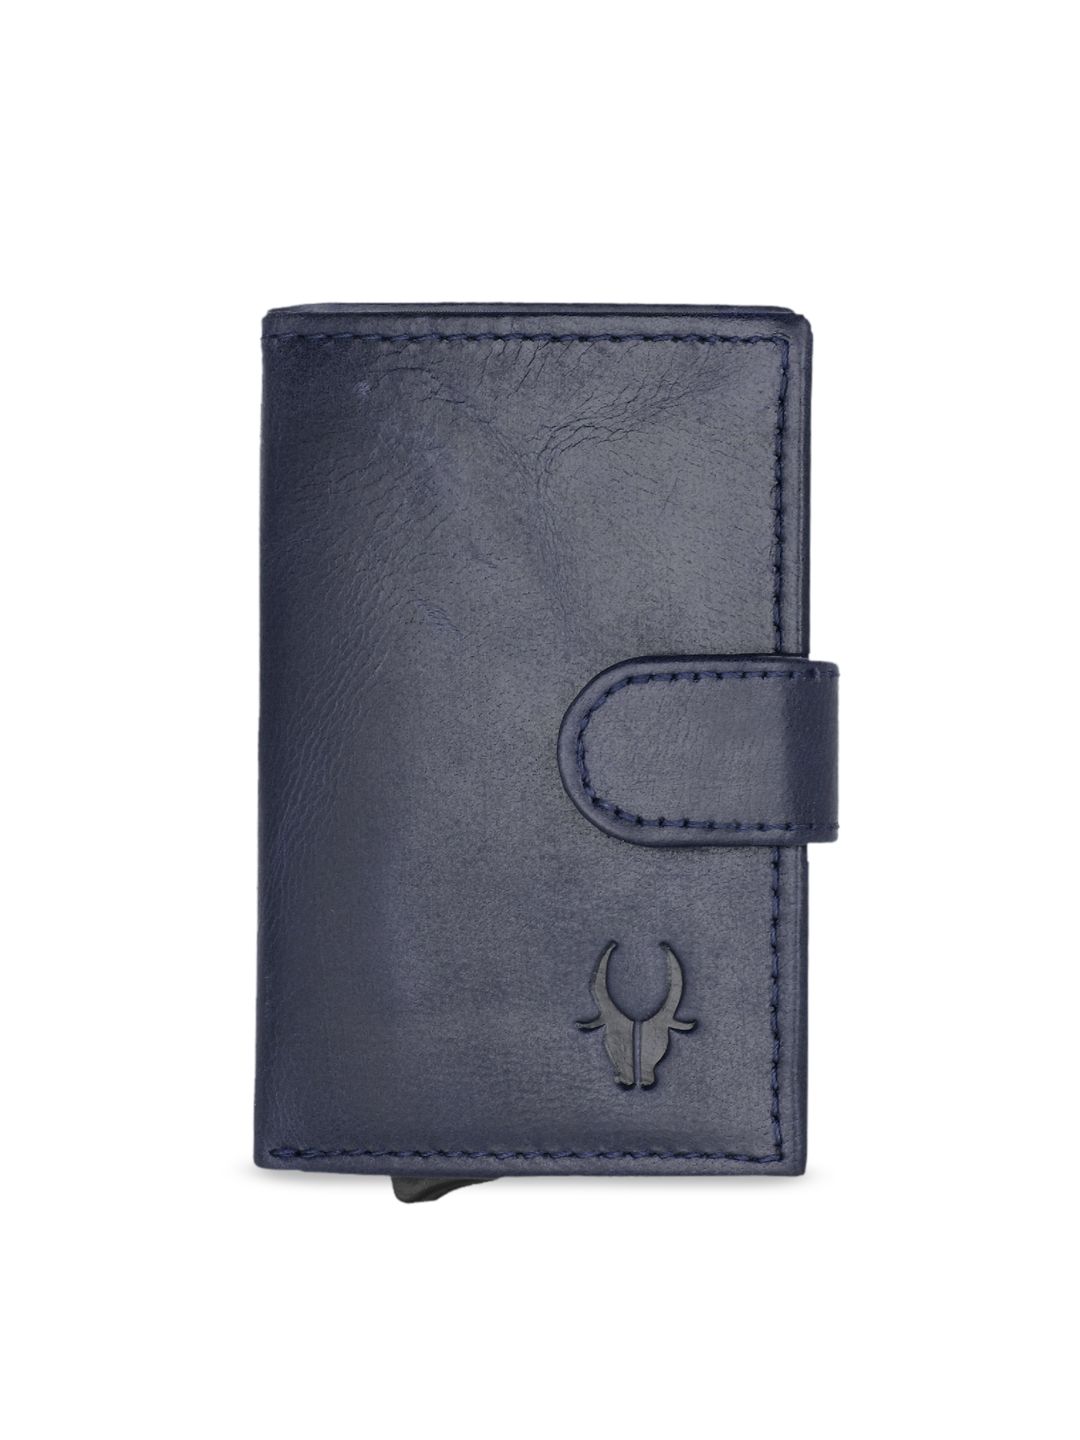 WildHorn Unisex Blue Solid Genuine Leather Card Holder Price in India